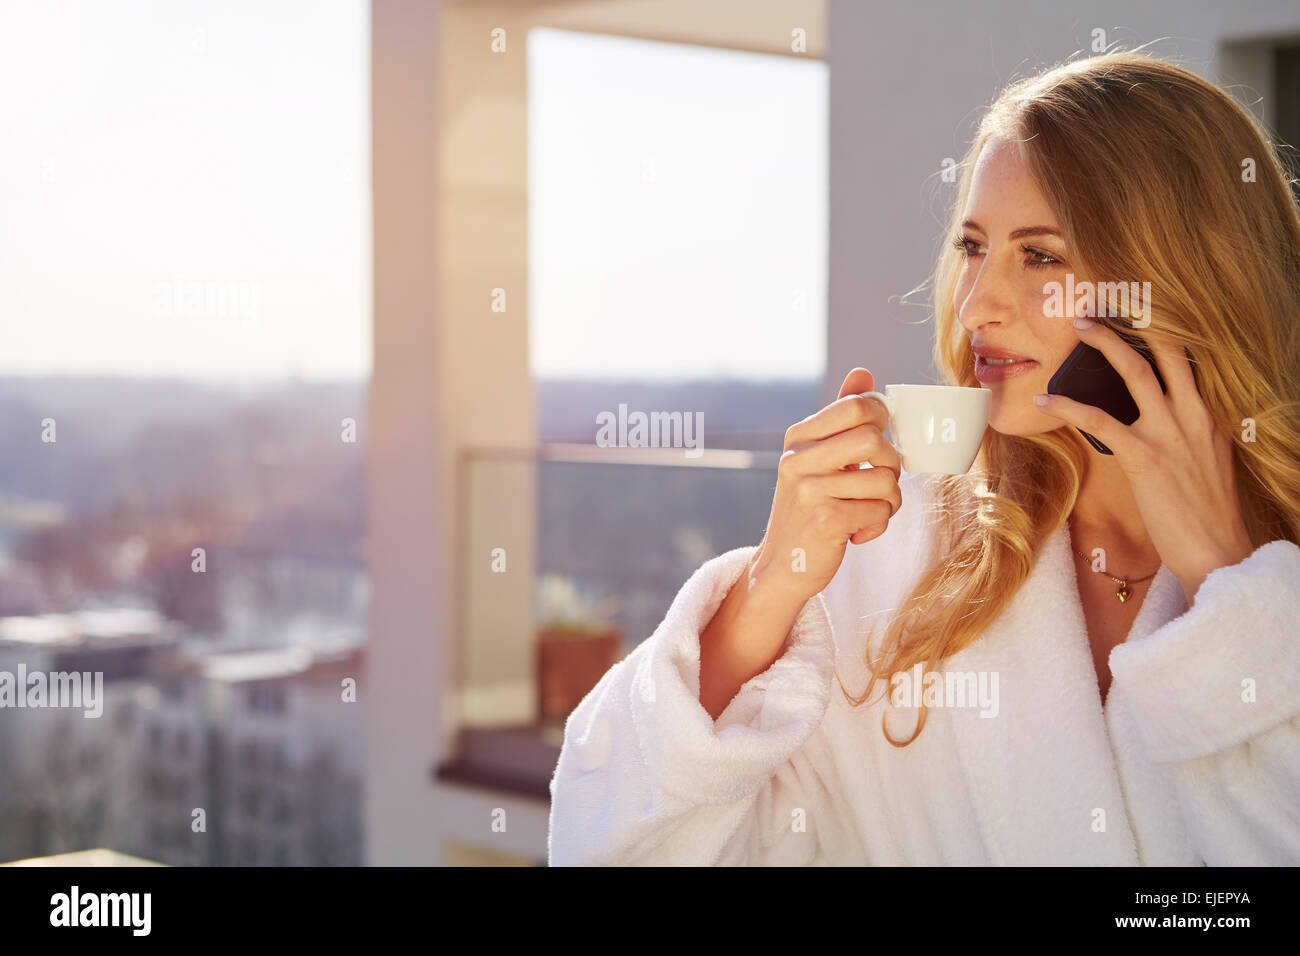 Drinking coffee at home. Stock Photo